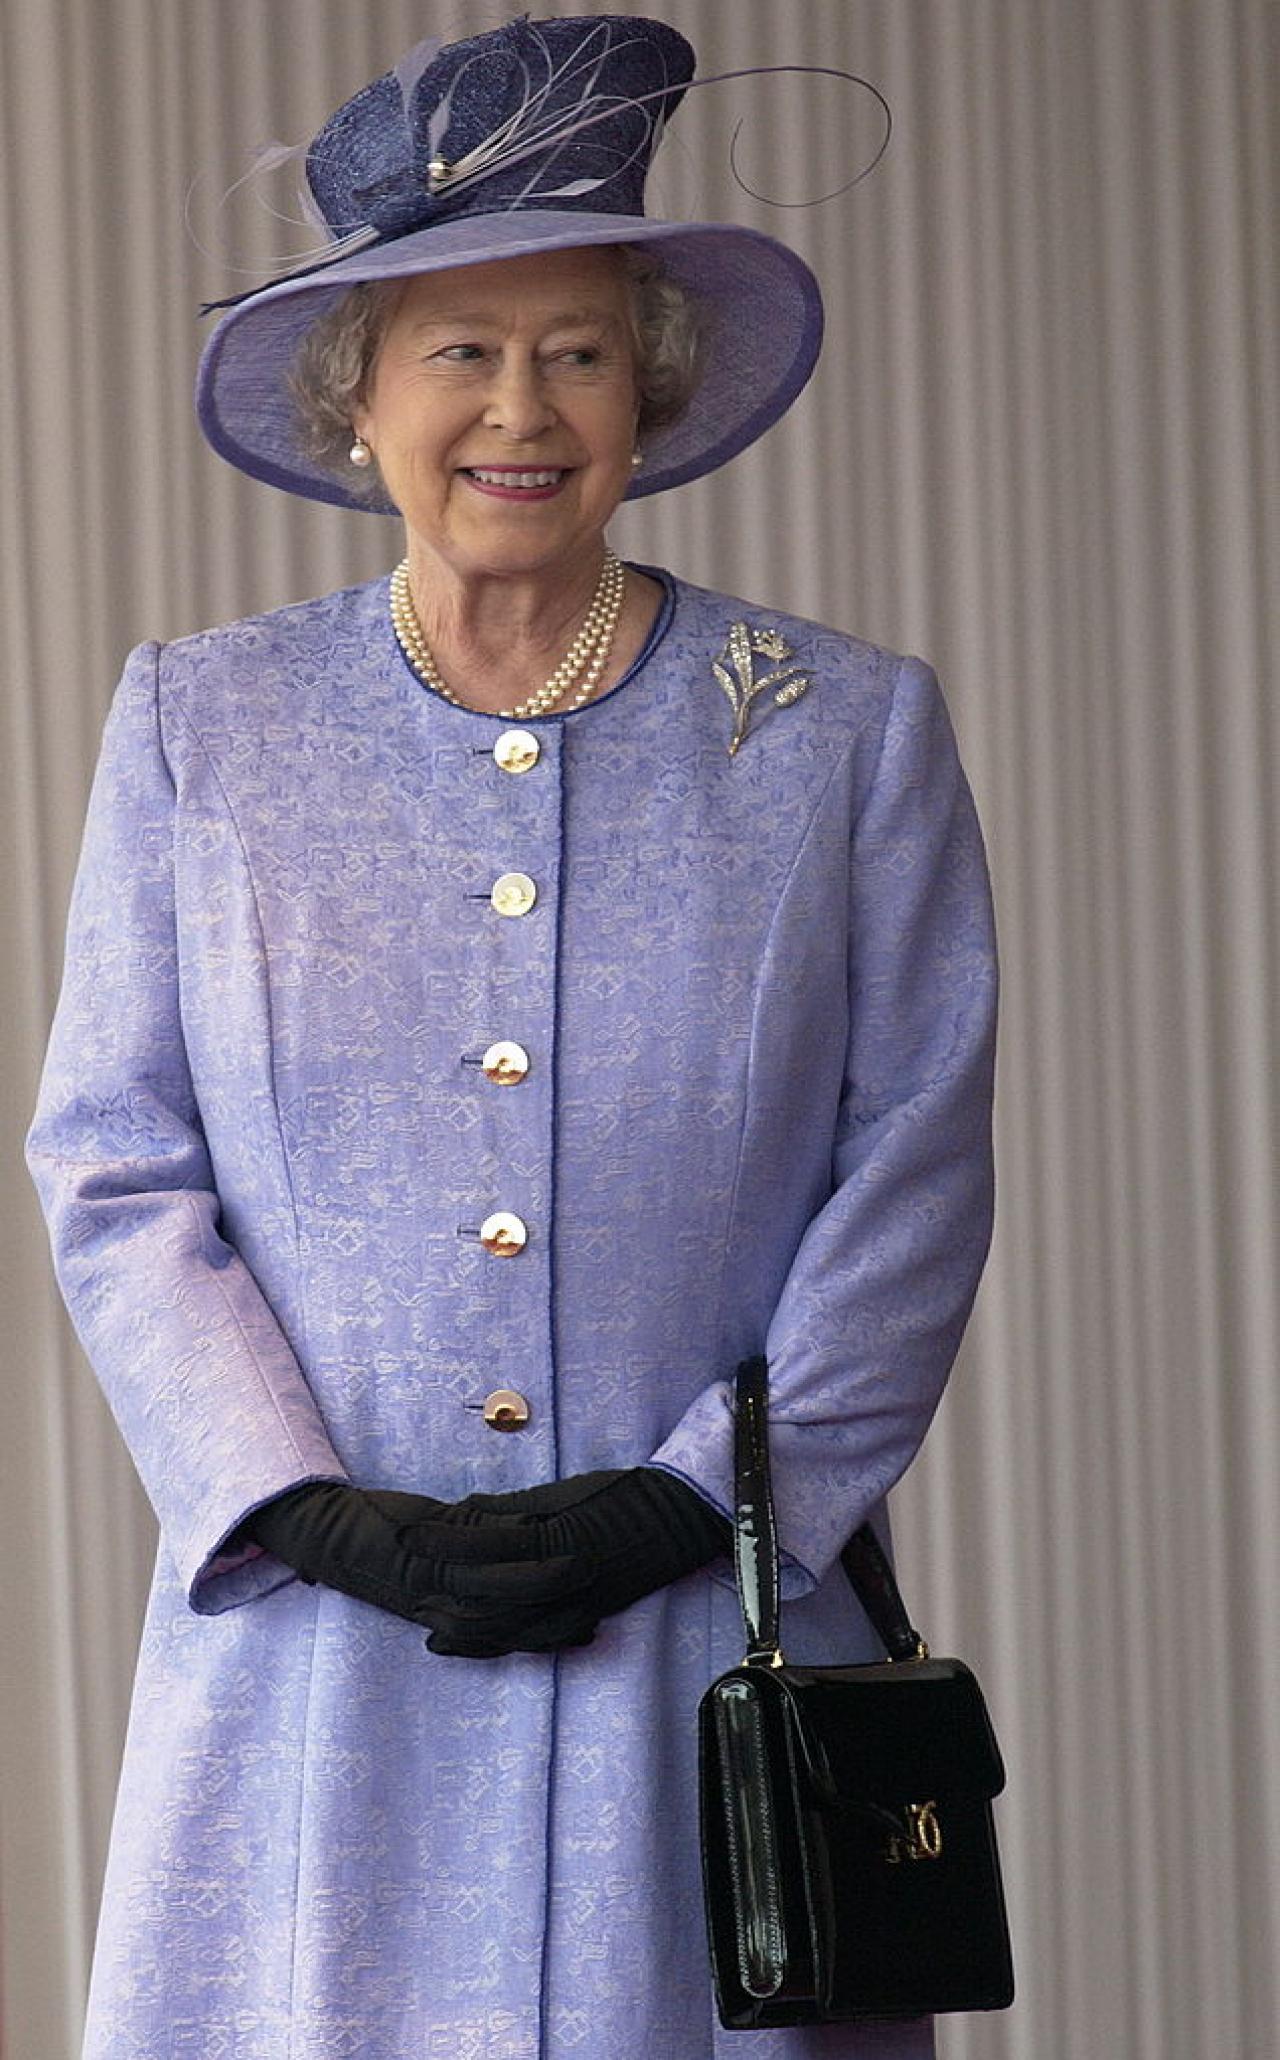 LONDON, UNITED KINGDOM - NOVEMBER 19:  Queen Elizabeth Ll Smiling During The State Visit Of The American President At Buckingham Palace.  The Queen Is Wearing A Mauve Coat With Matching Hat Which She Has Accessorized With Black Gloves And A Black Launer Handbag.  (Photo by Tim Graham Photo Library via Getty Images)